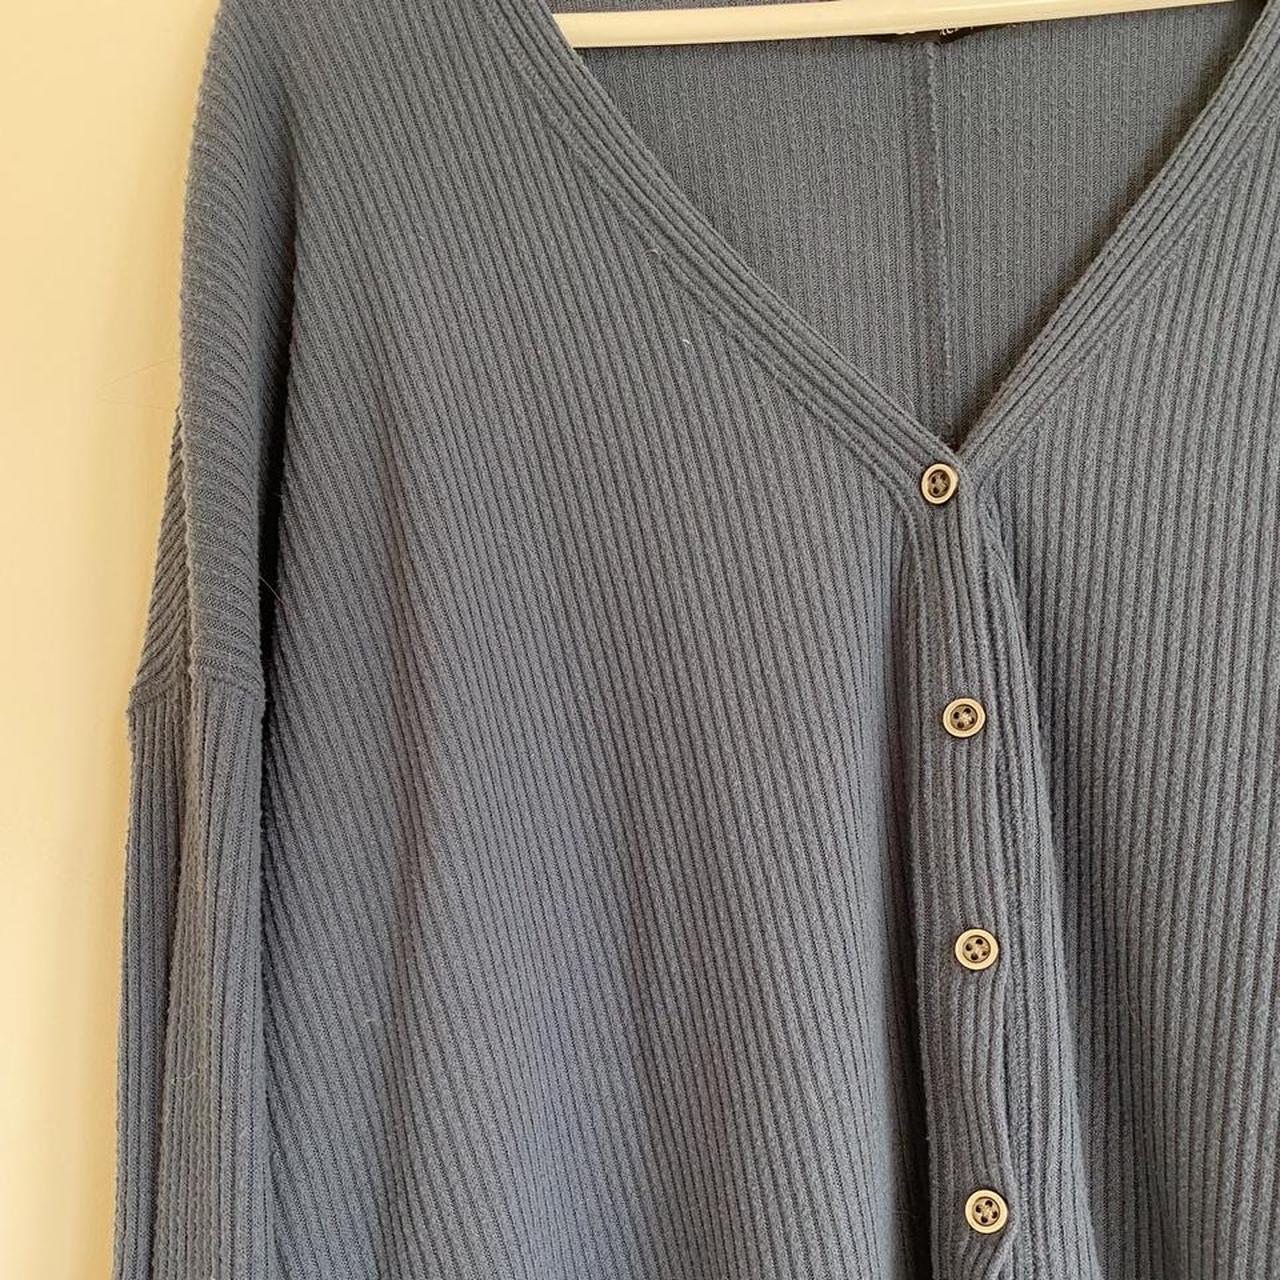 Product Image 2 - Blue button up sweater. Super